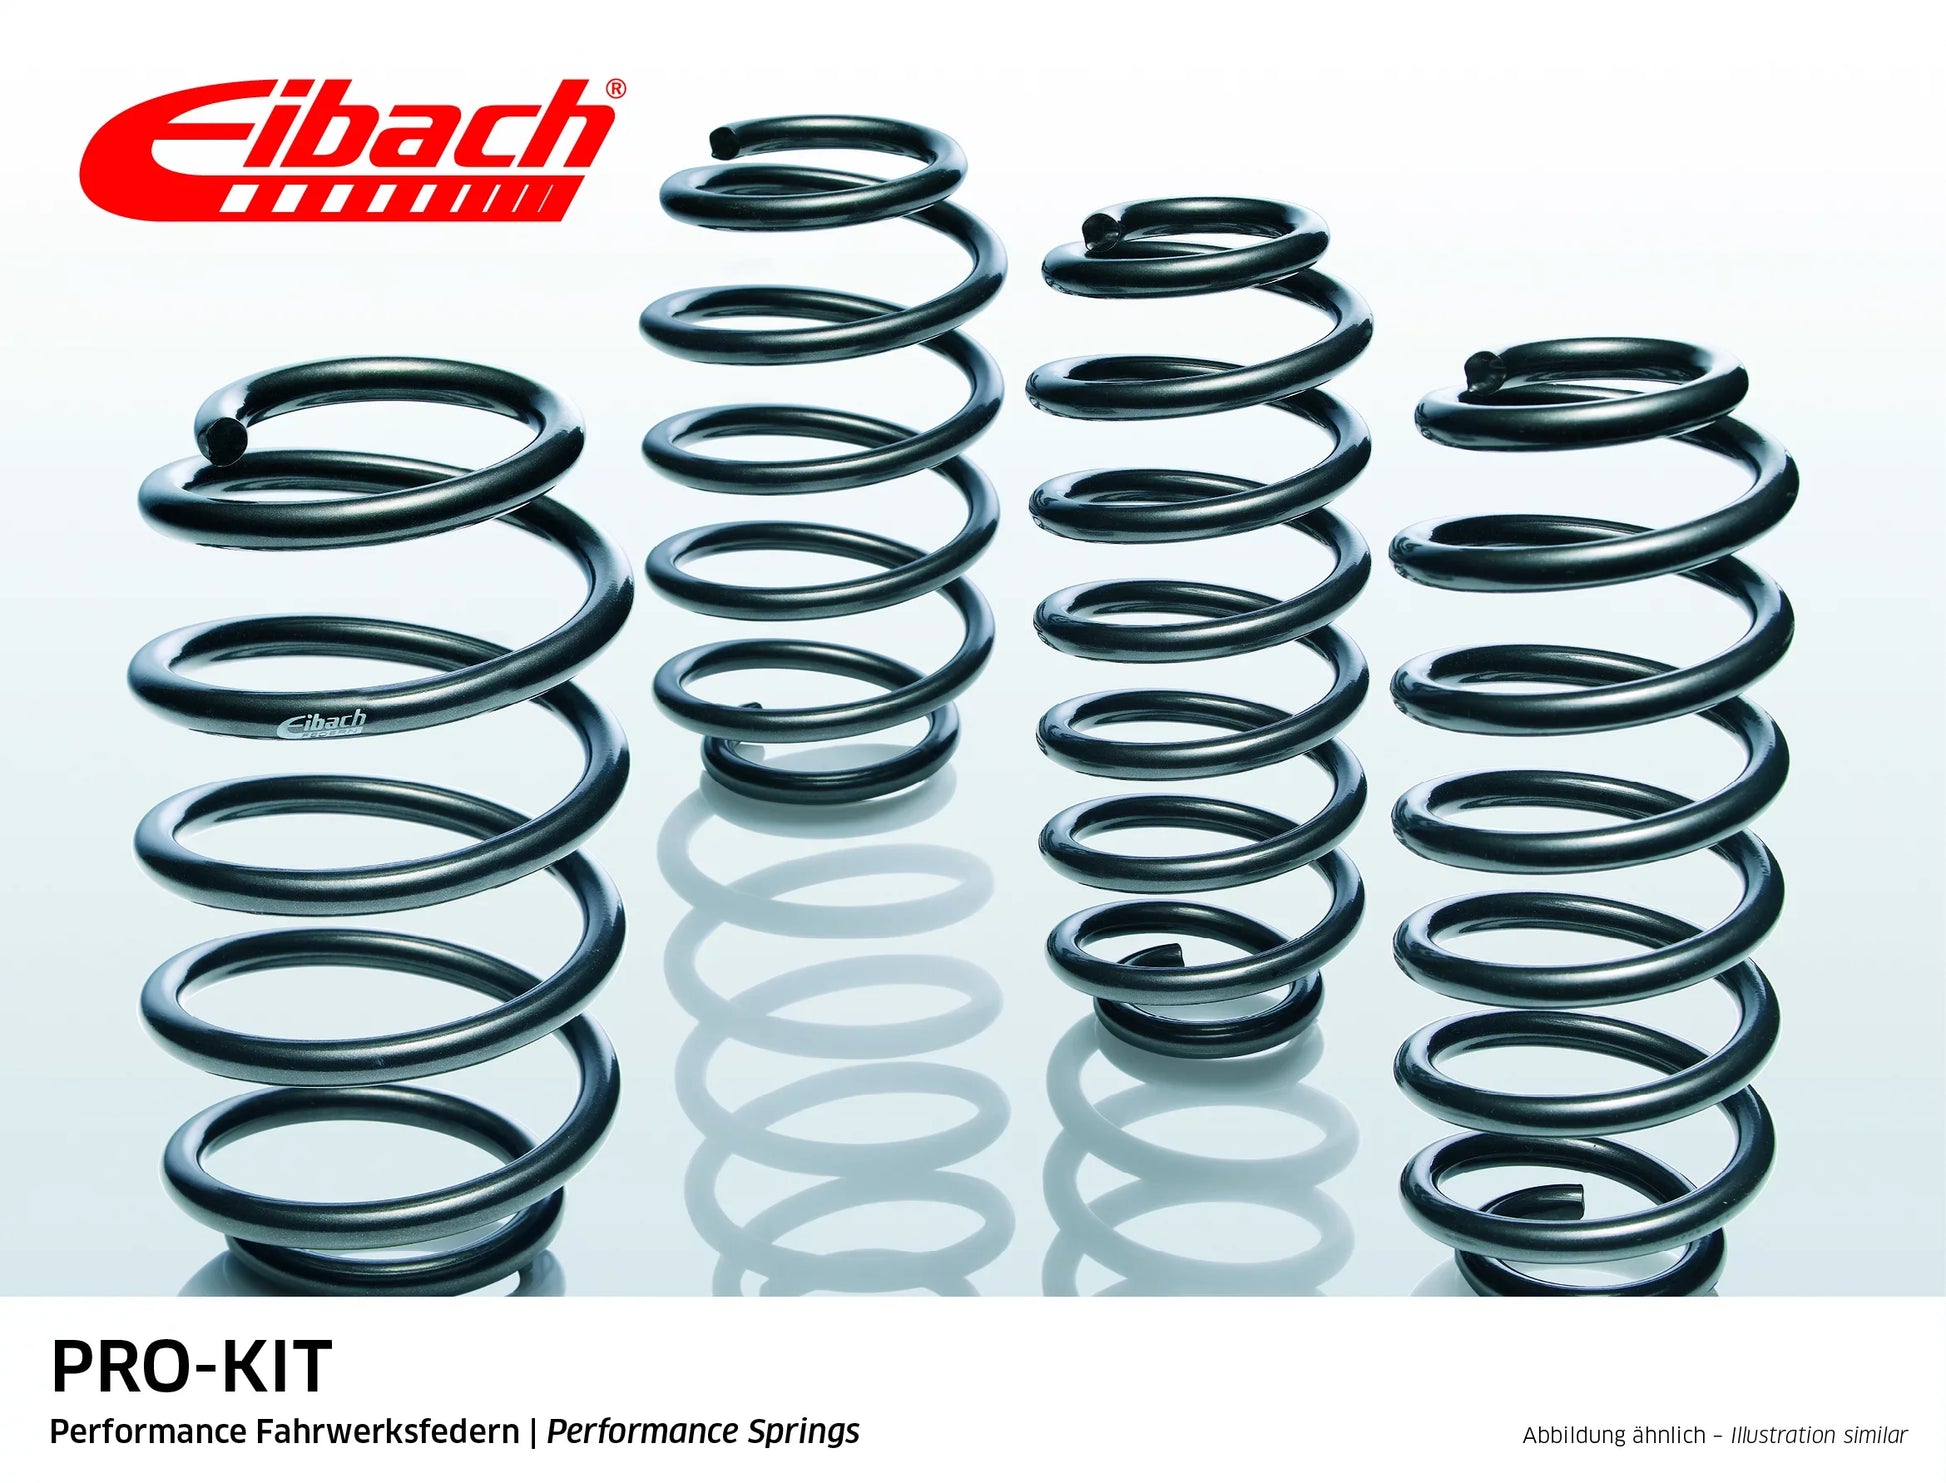 Eibach Pro-Kit Lowering Springs (E10-15-008-05-22) at £305.56